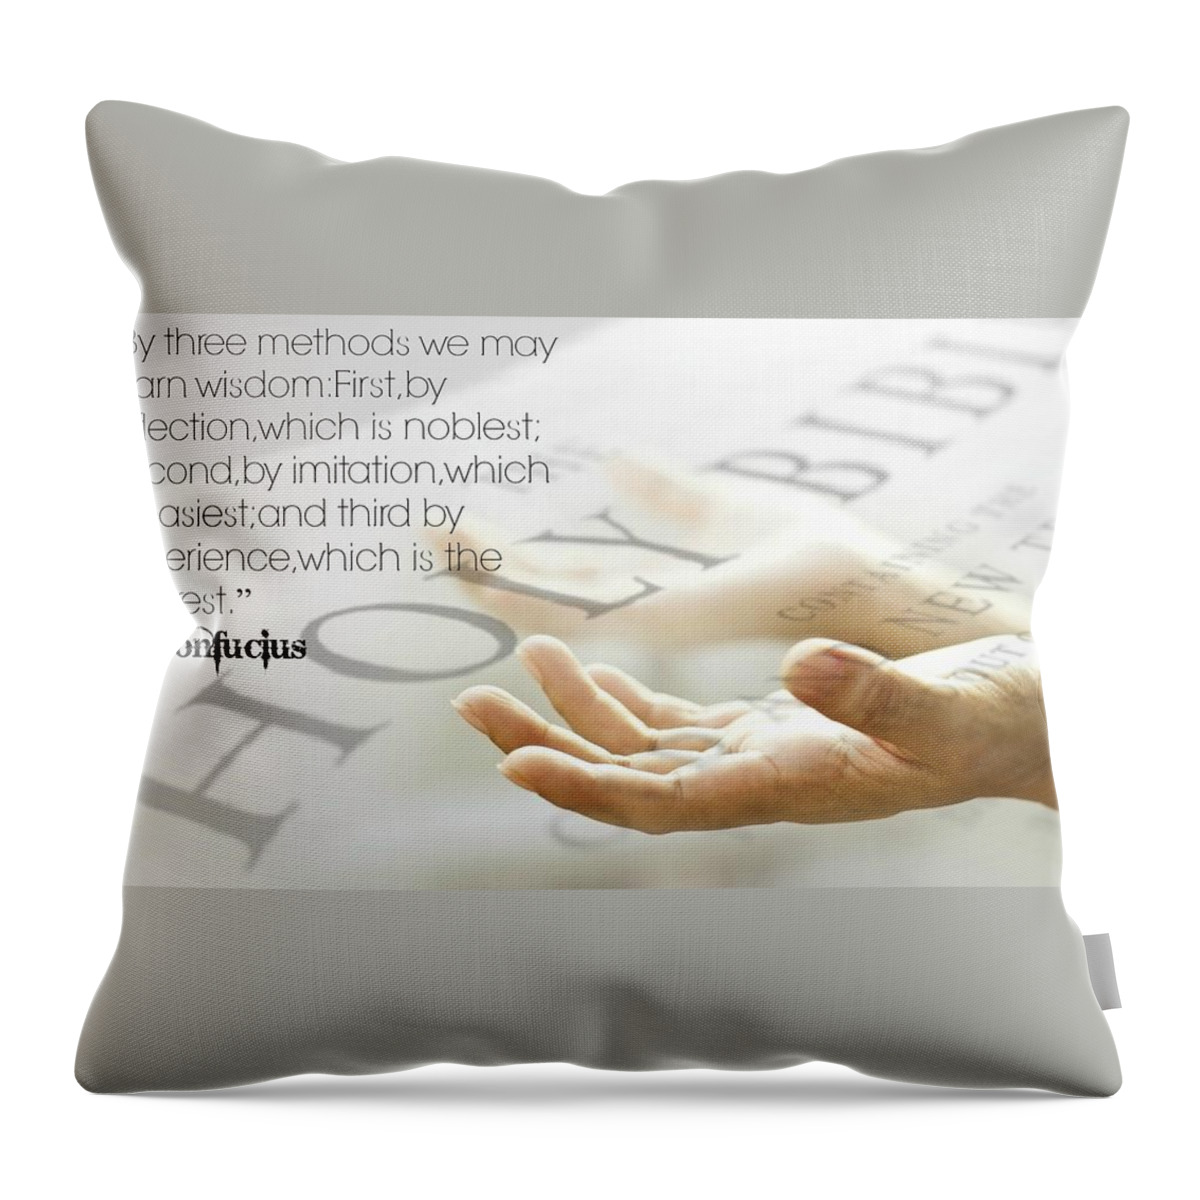  Throw Pillow featuring the photograph Uplifting214 by David Norman